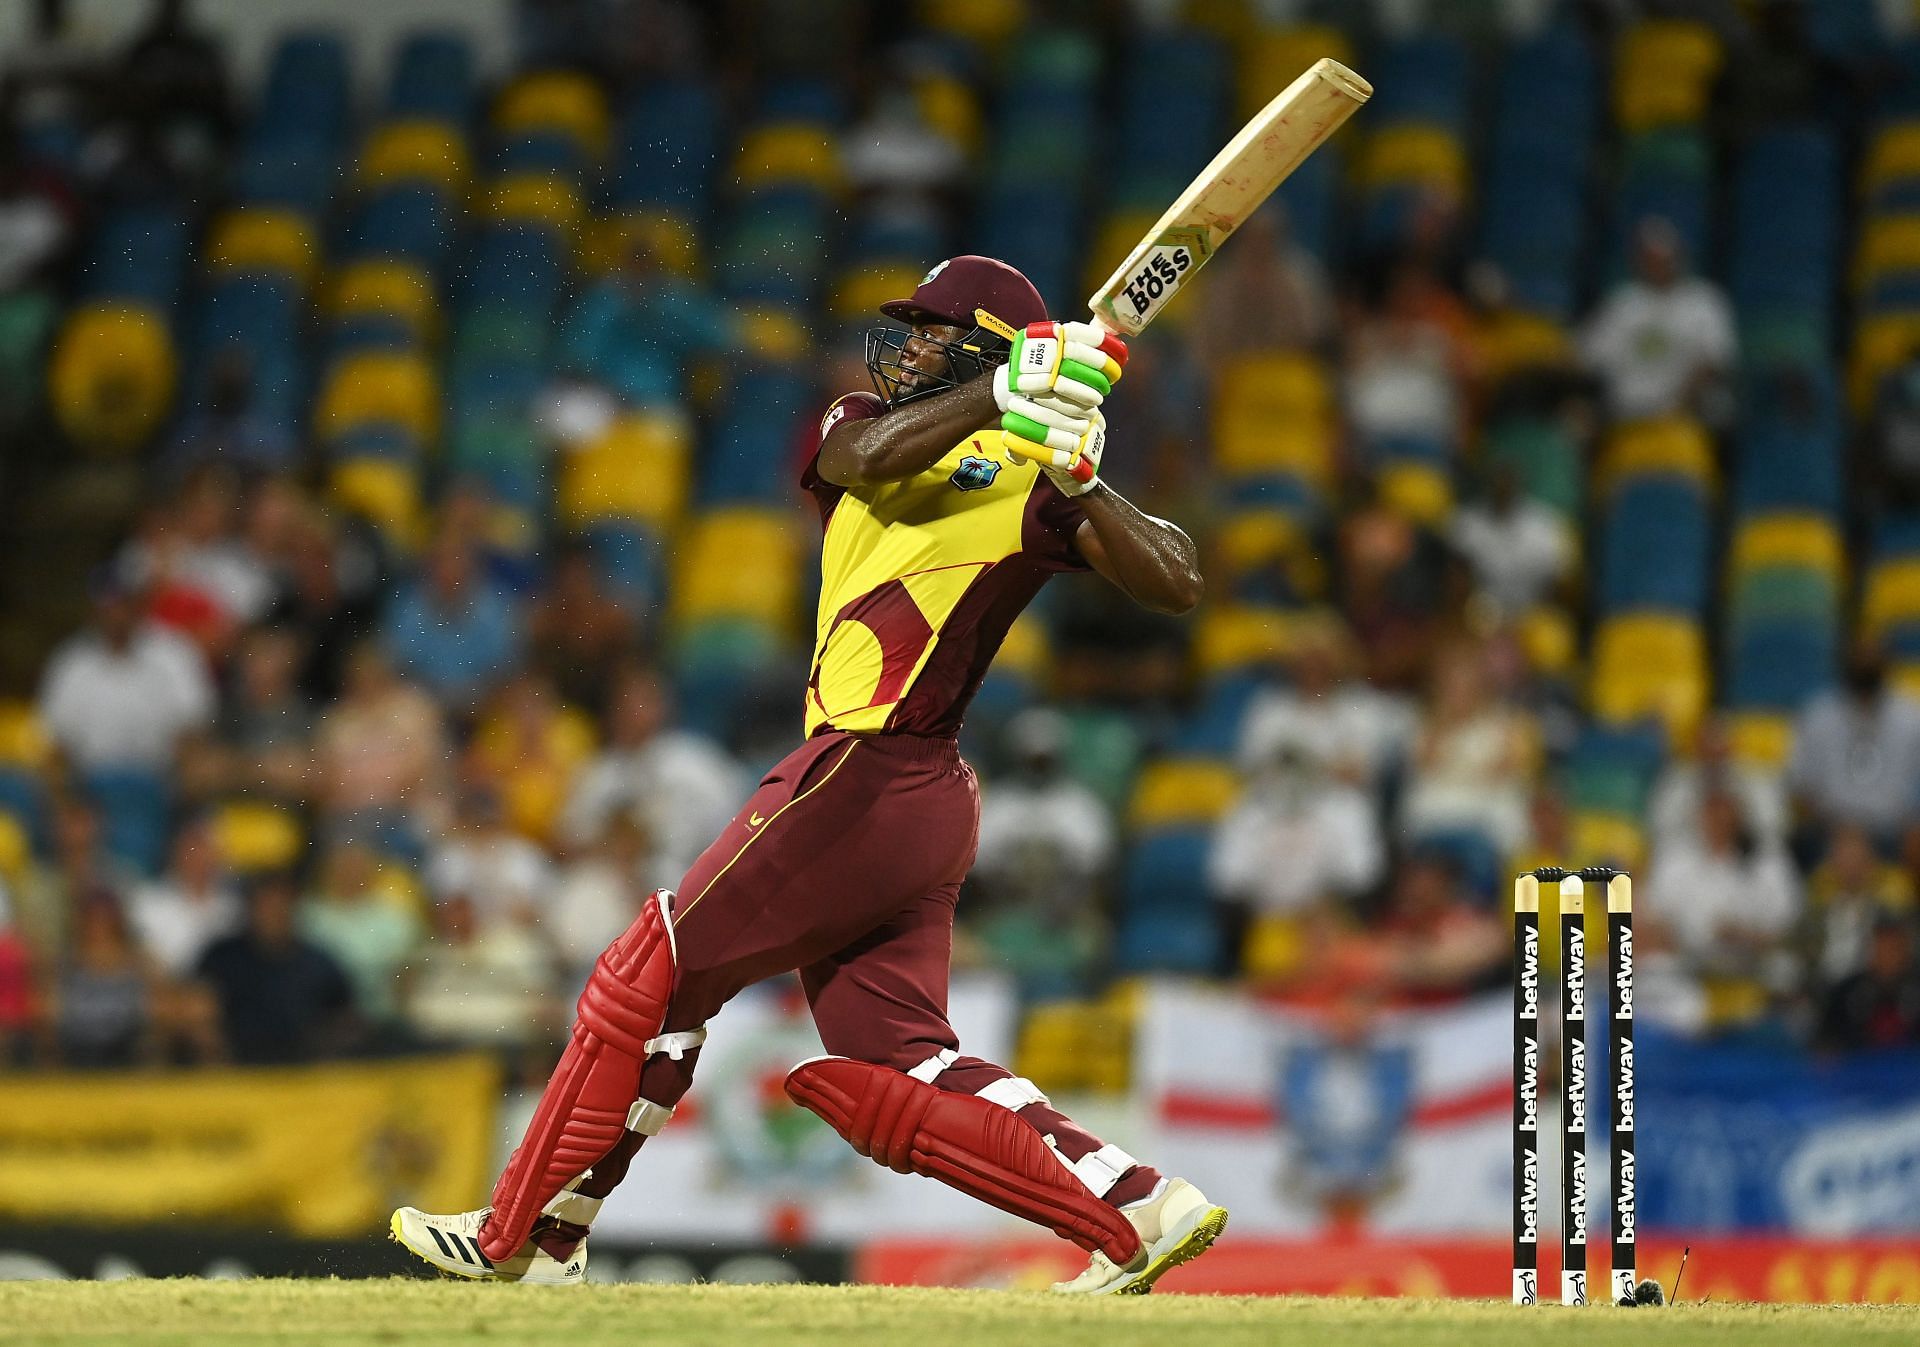 West Indies v England - T20 International Series Second T20I (Image courtesy: Getty)